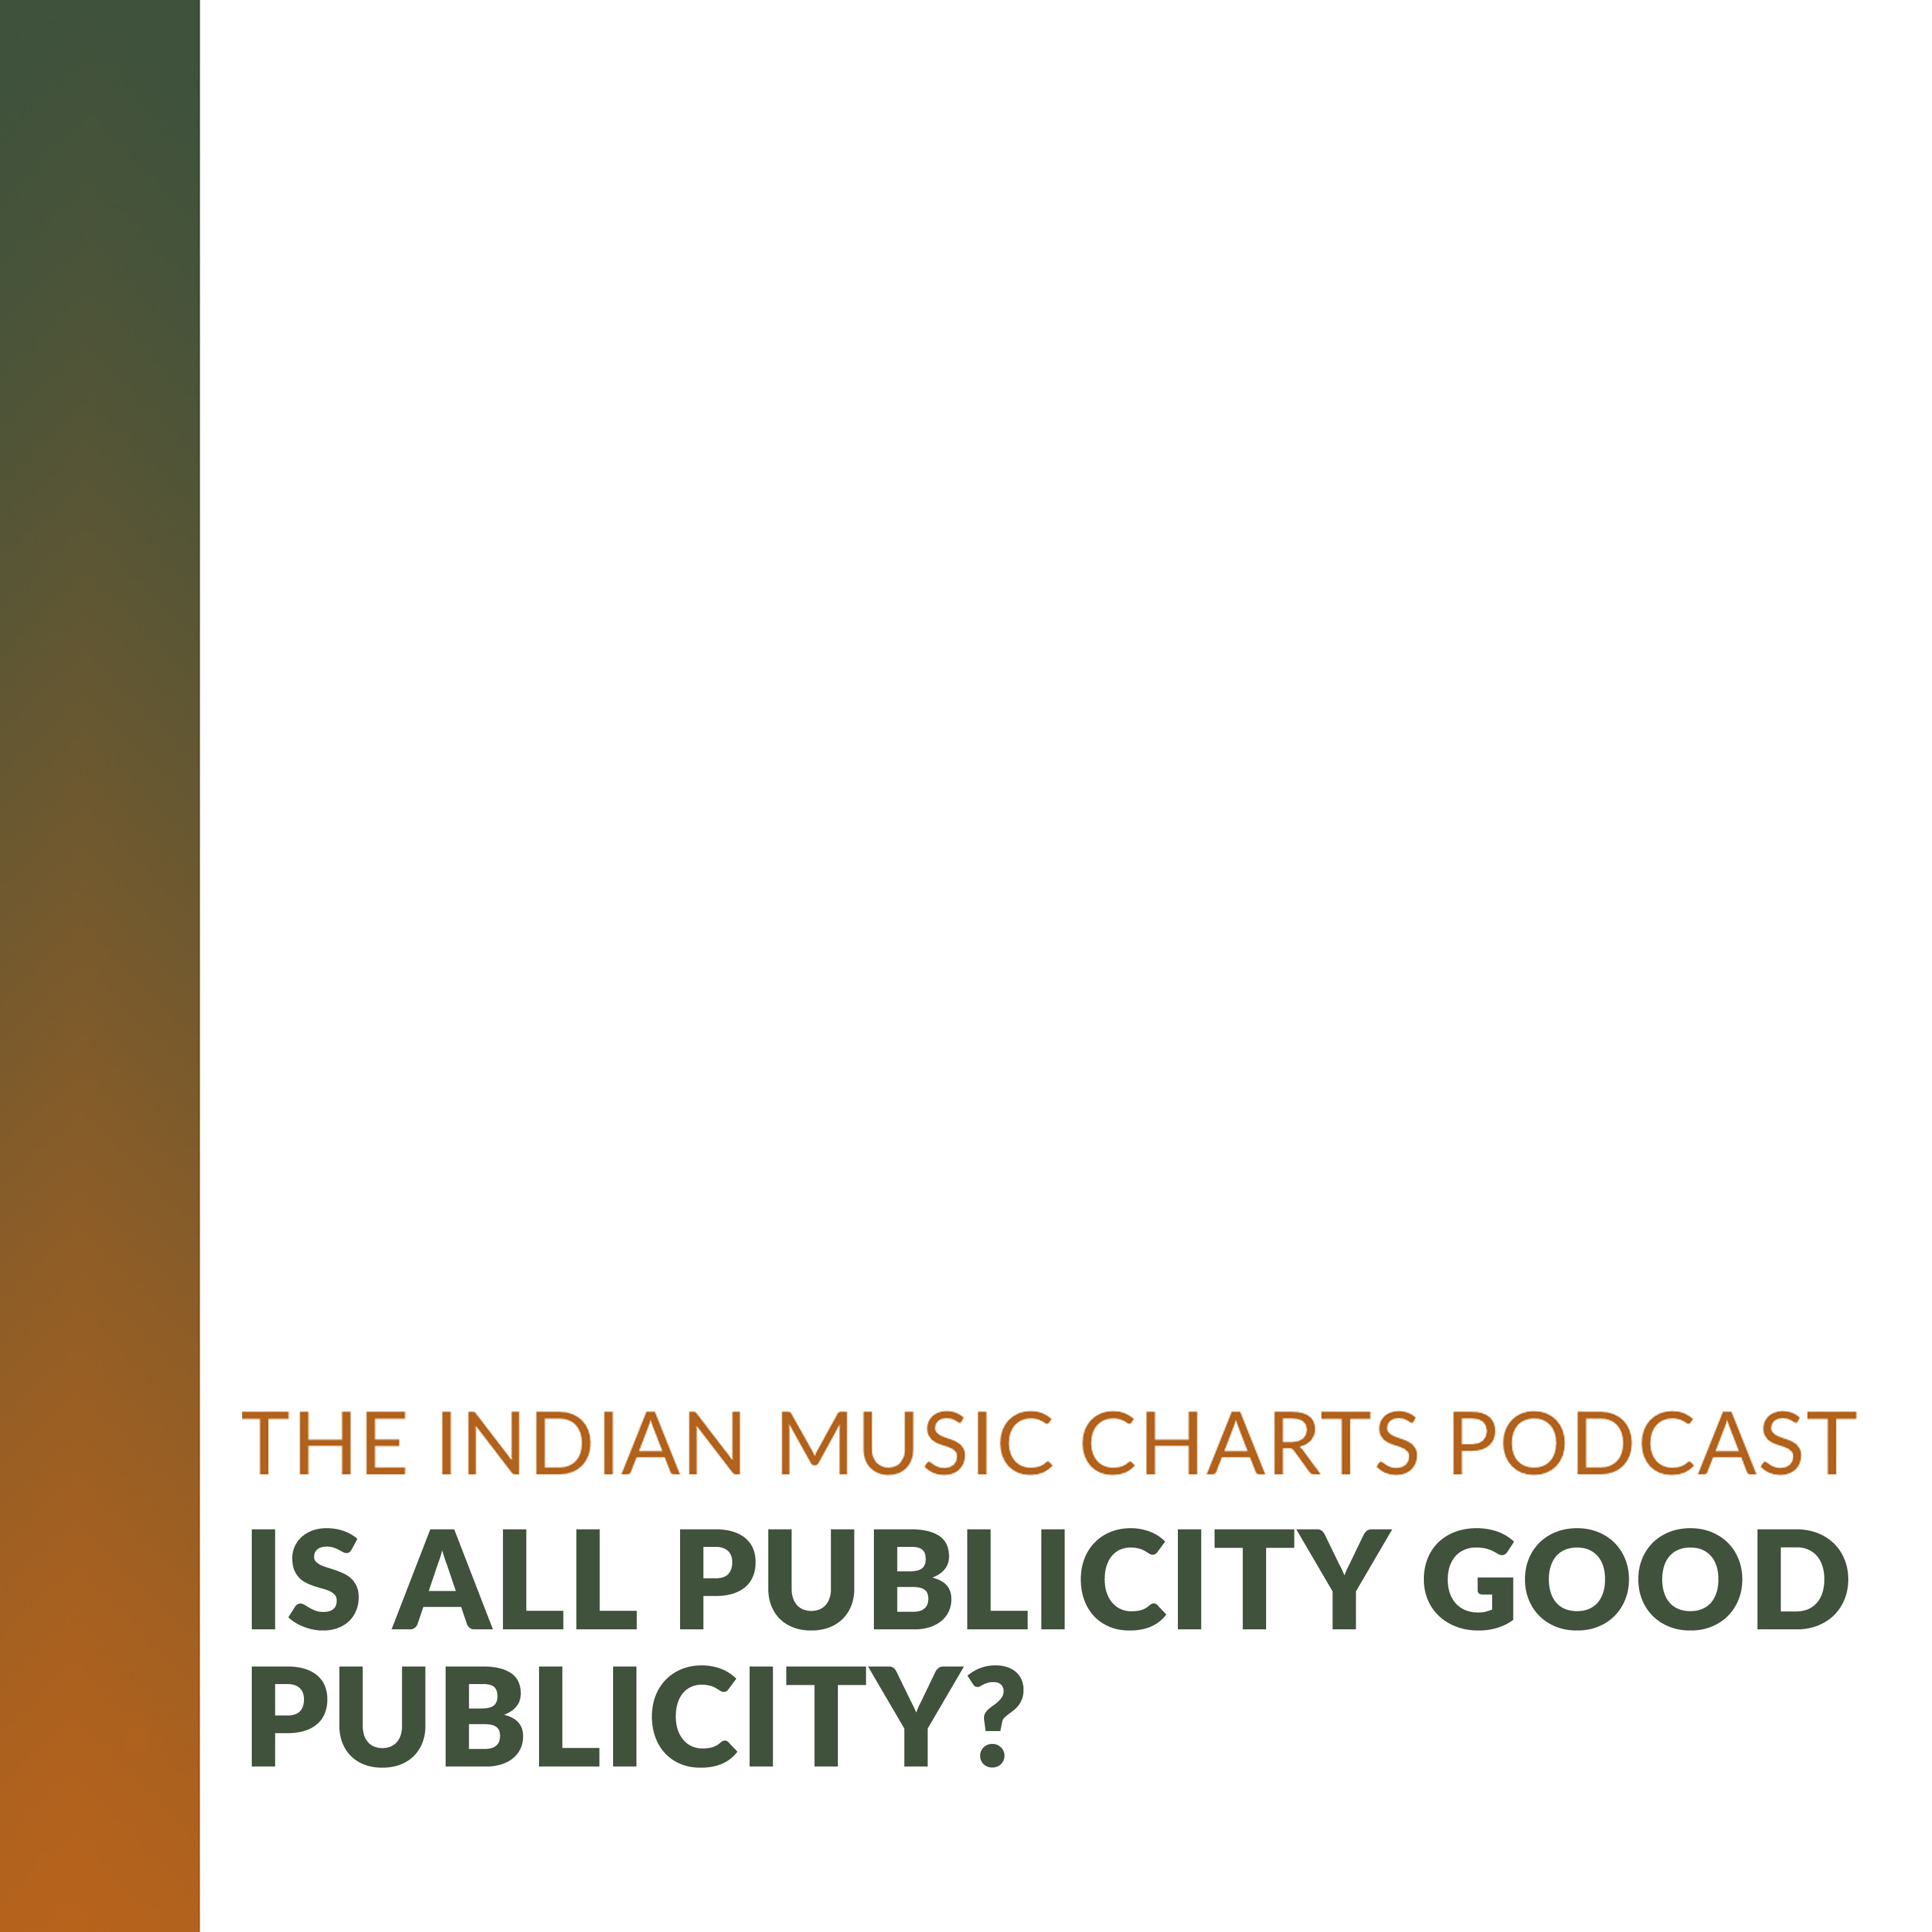 Is all publicity good publicity?